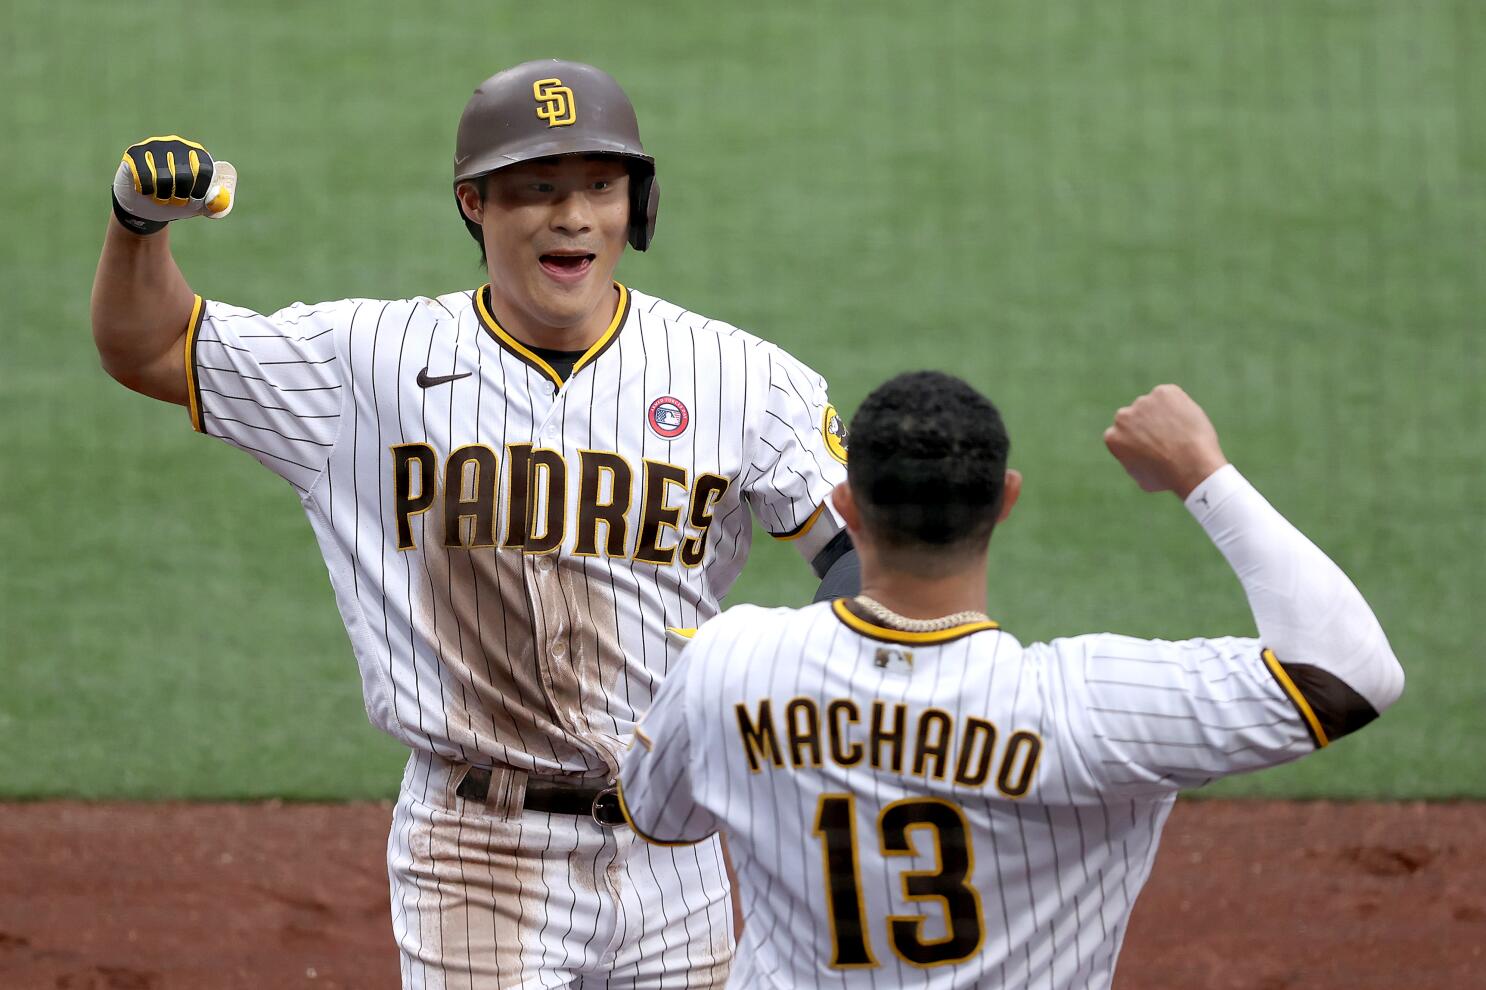 The Padres' MVP in 2023? Look in the mirror - The San Diego Union-Tribune